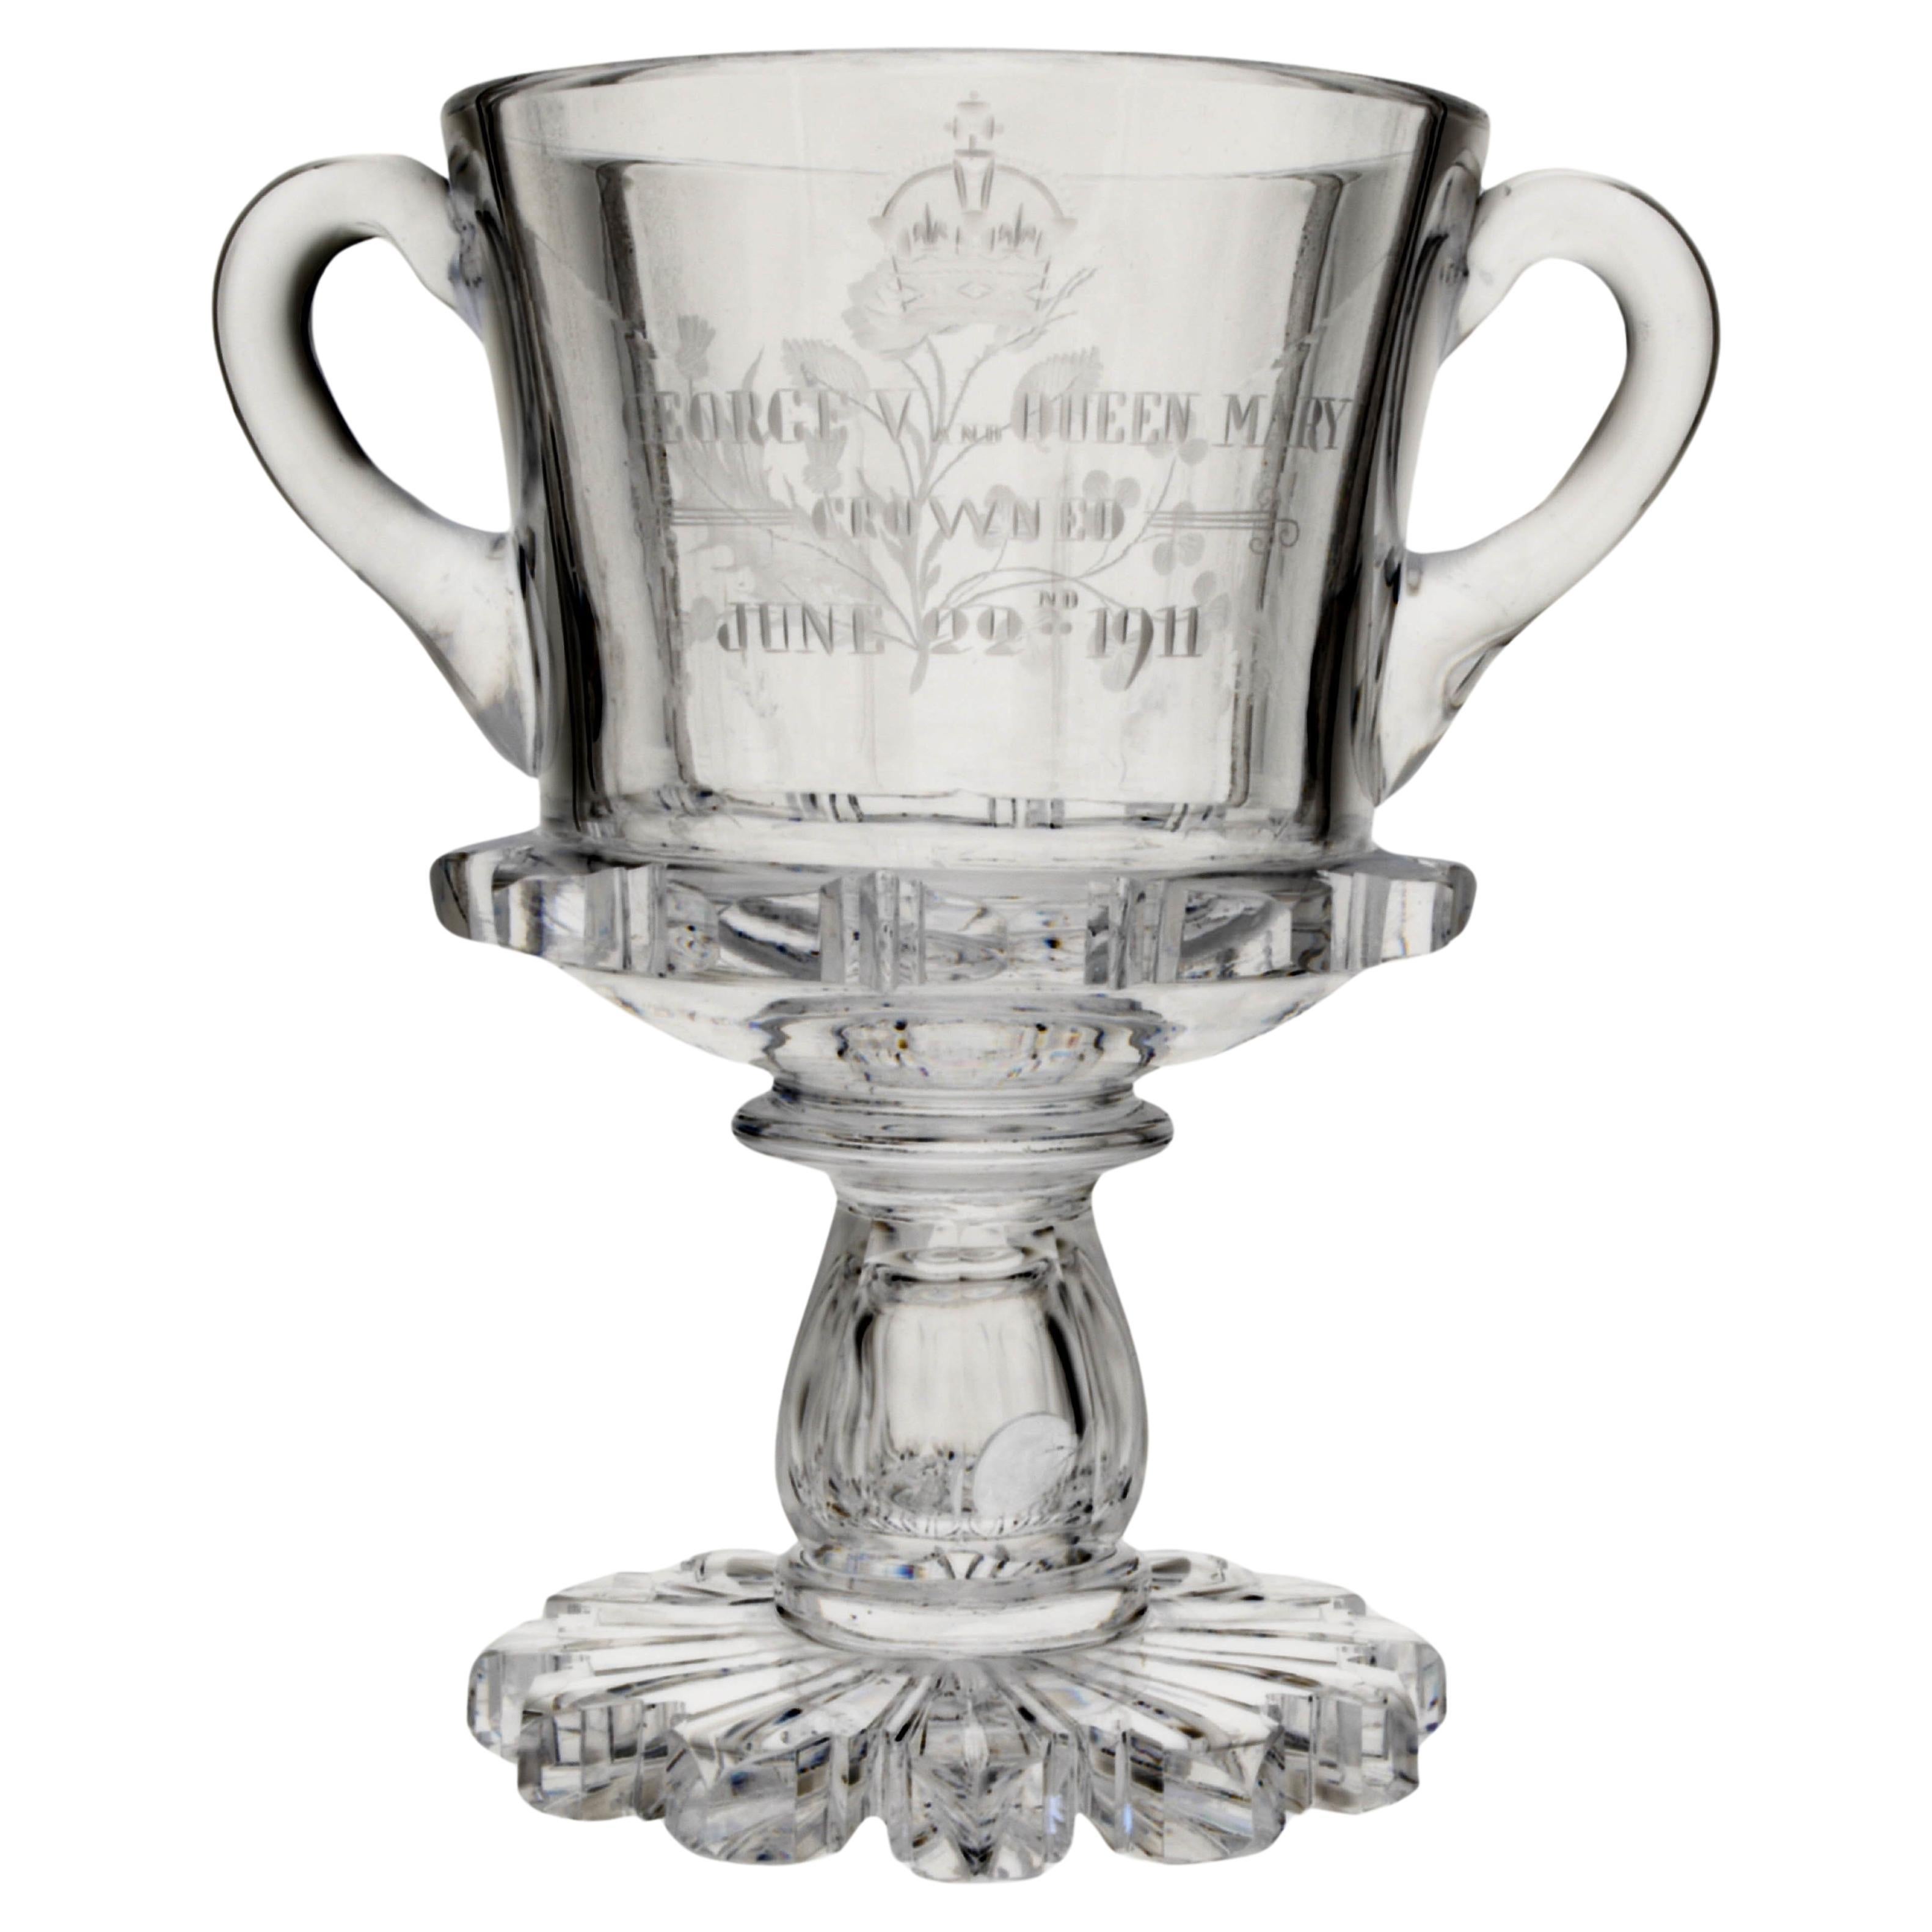 Glass Loving Cup, for the Coronation of George V and Queen Mary 1911